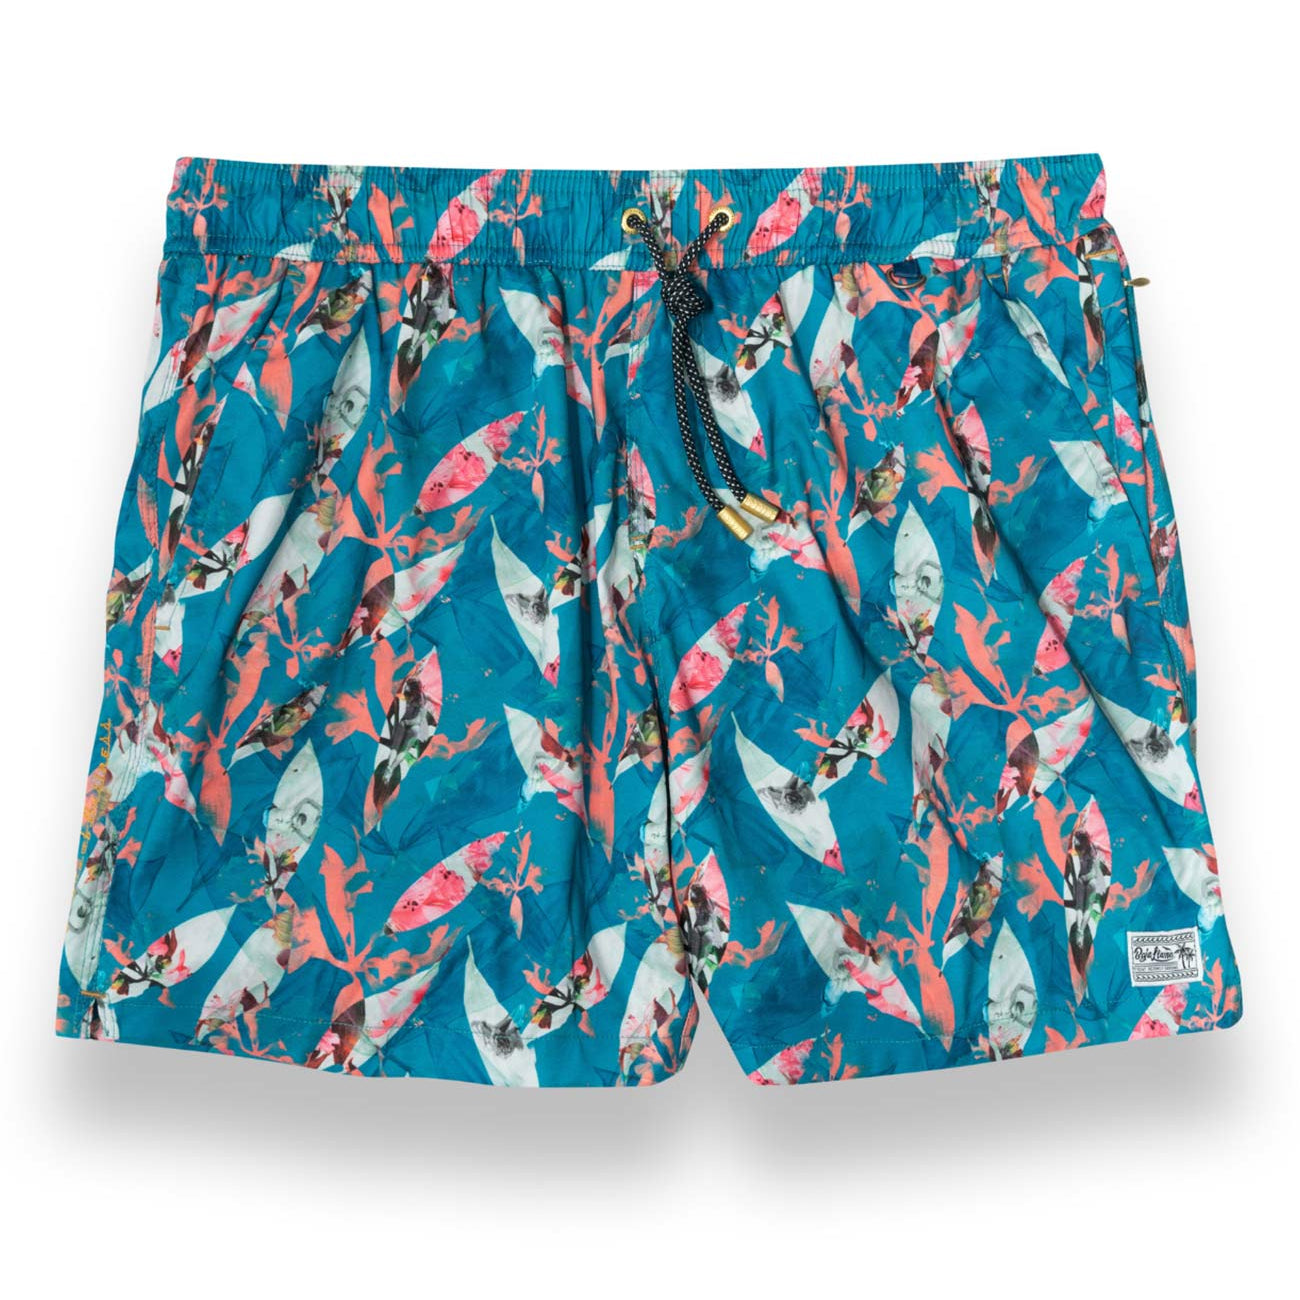 Turquoise floral men's volley shorts with retro print of woman surfing.